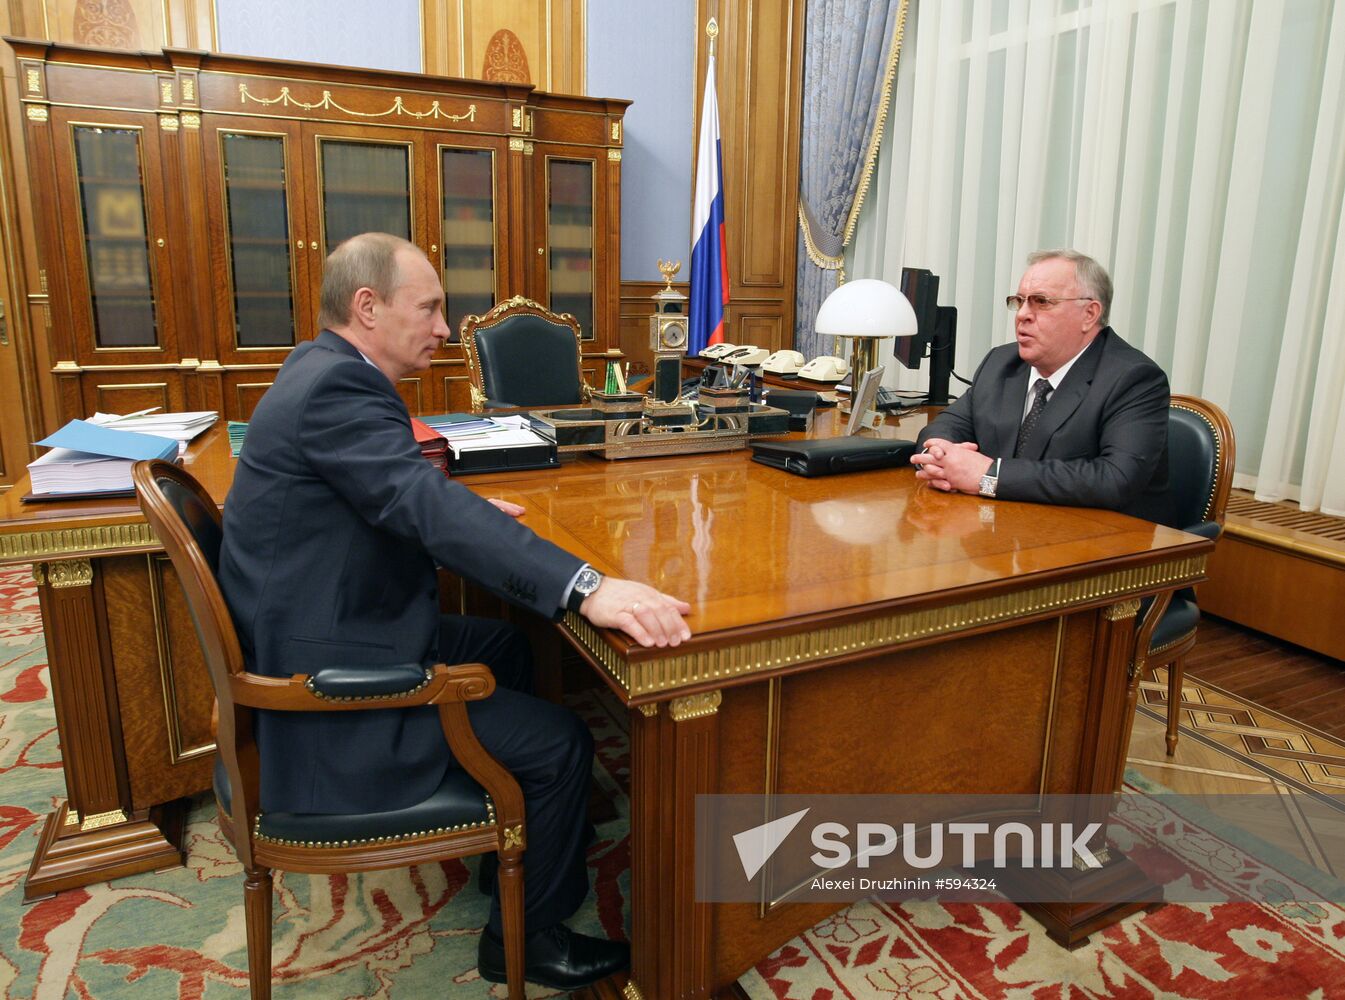 Vladimir Putin conducts several meetings on March 9, 2010